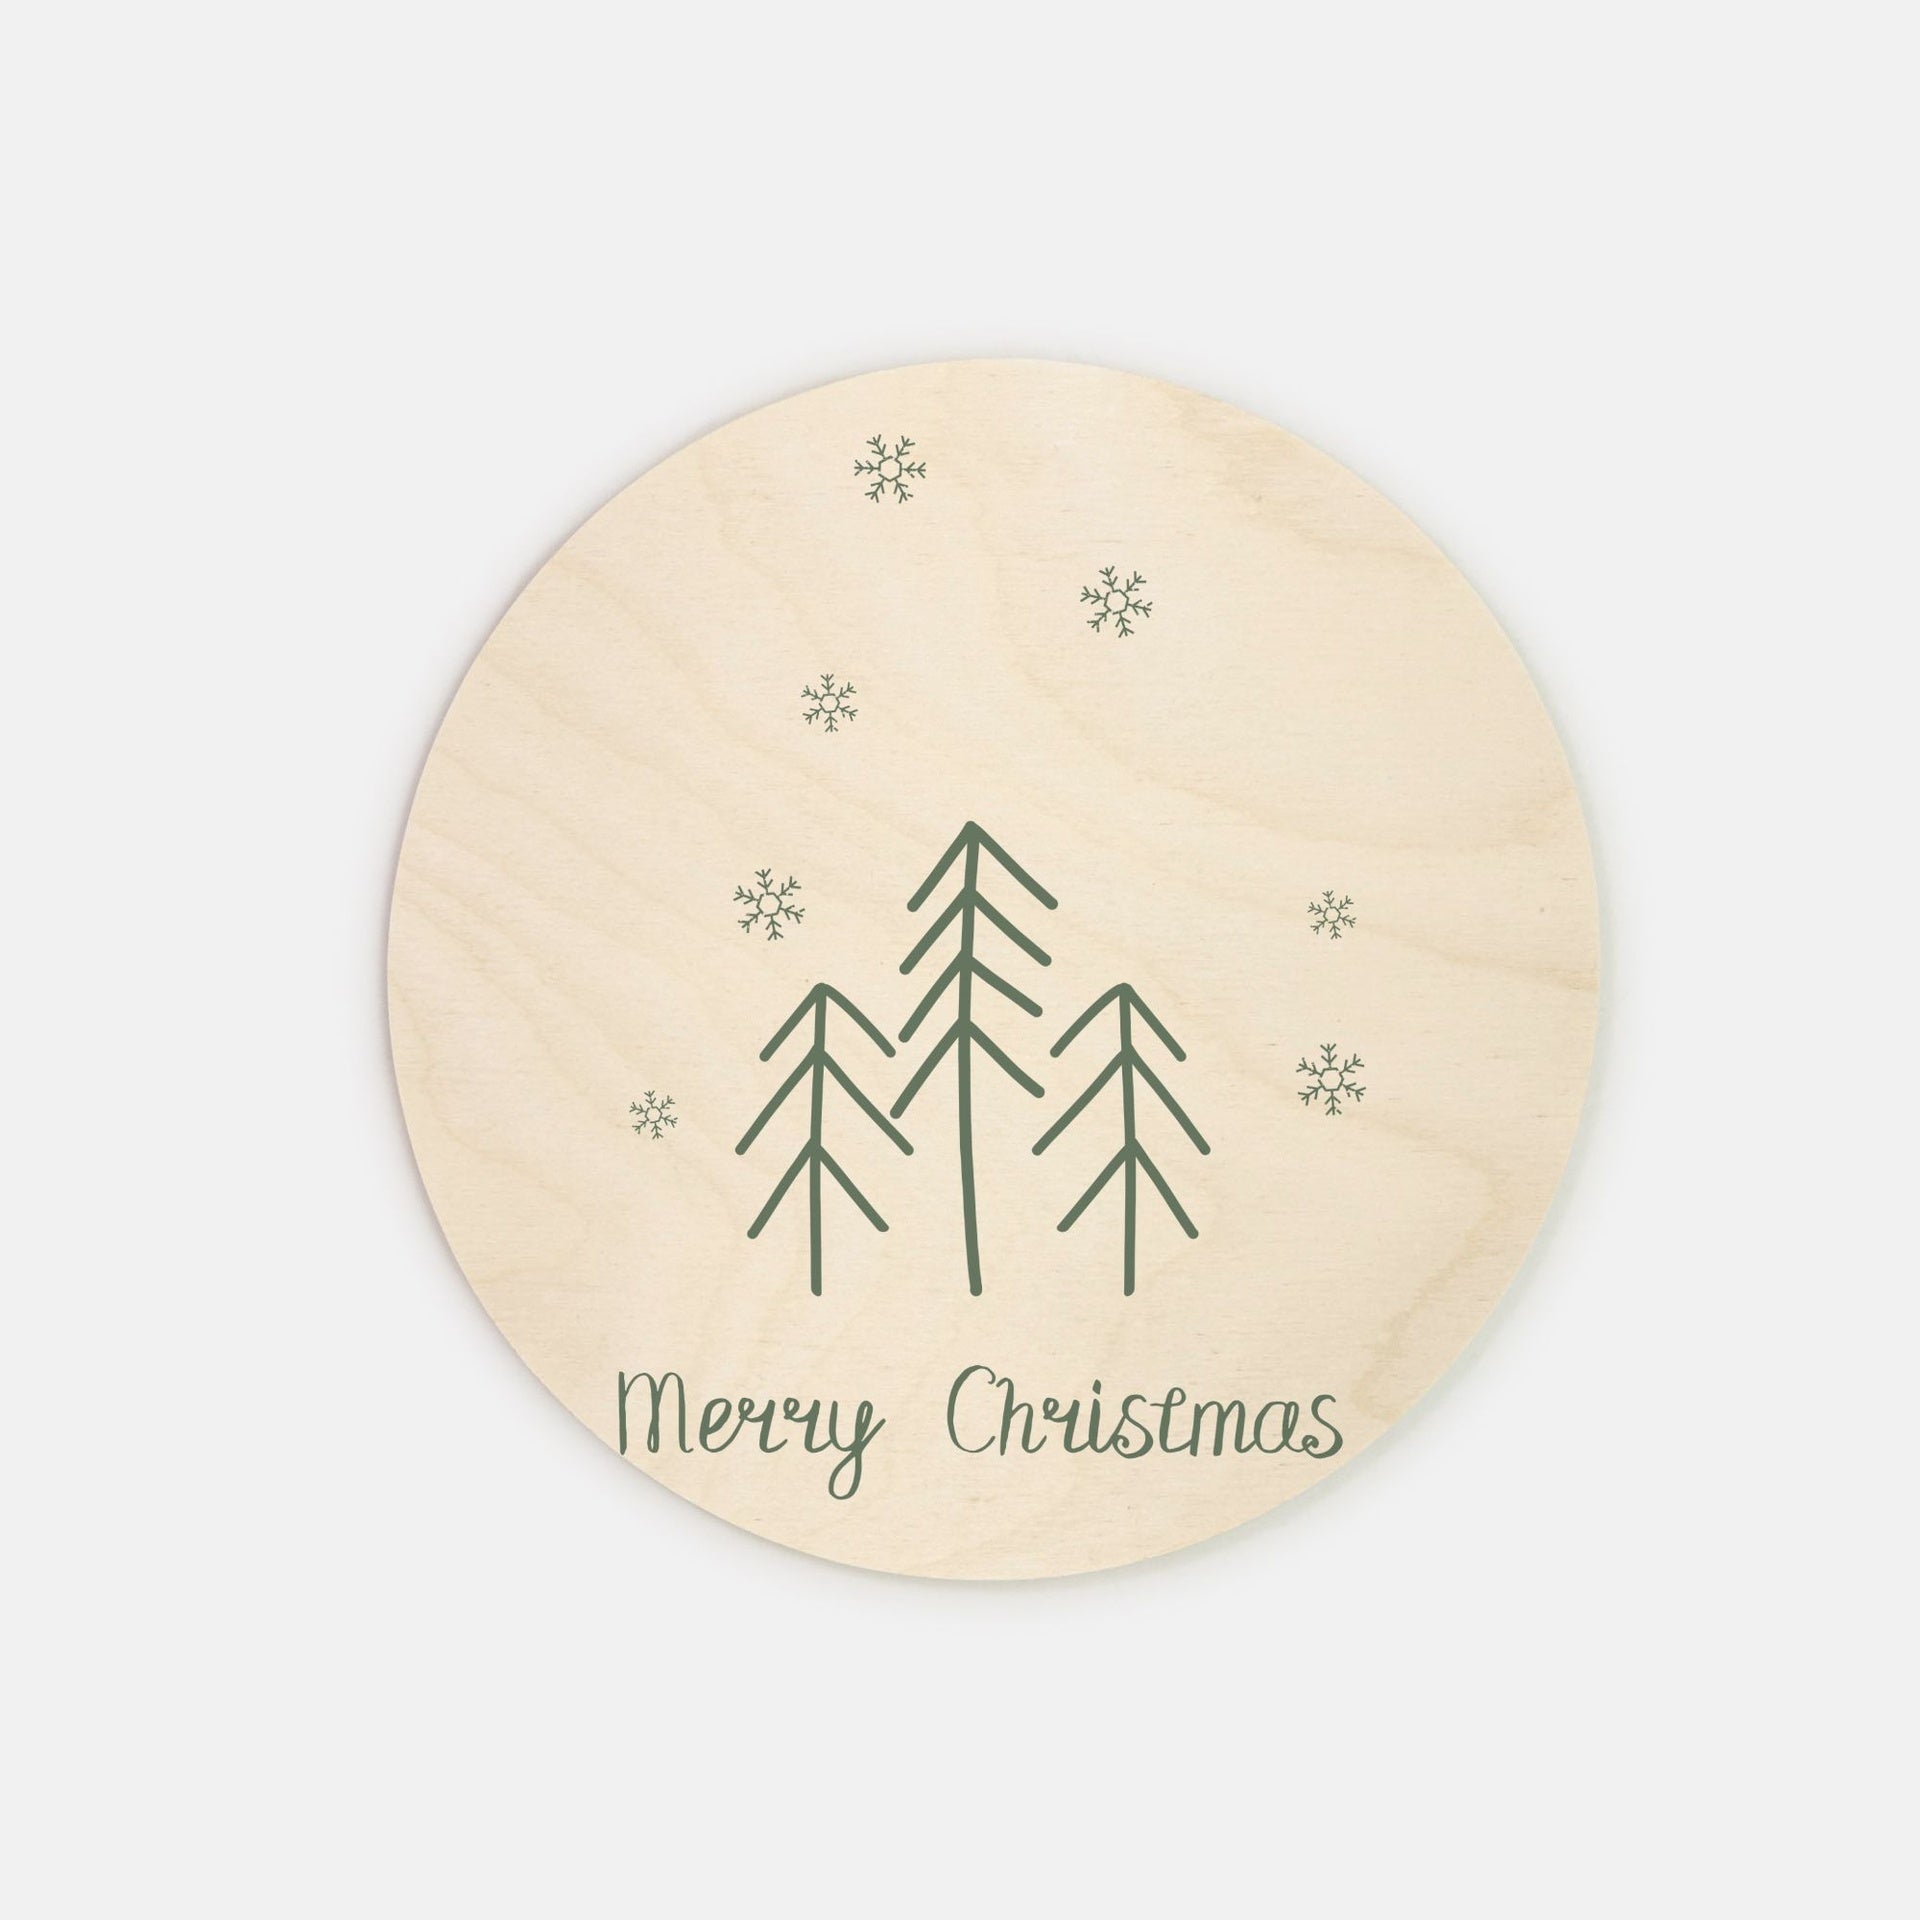 8" Round Wood Sign - Merry Christmas Evergreens & Snowflakes